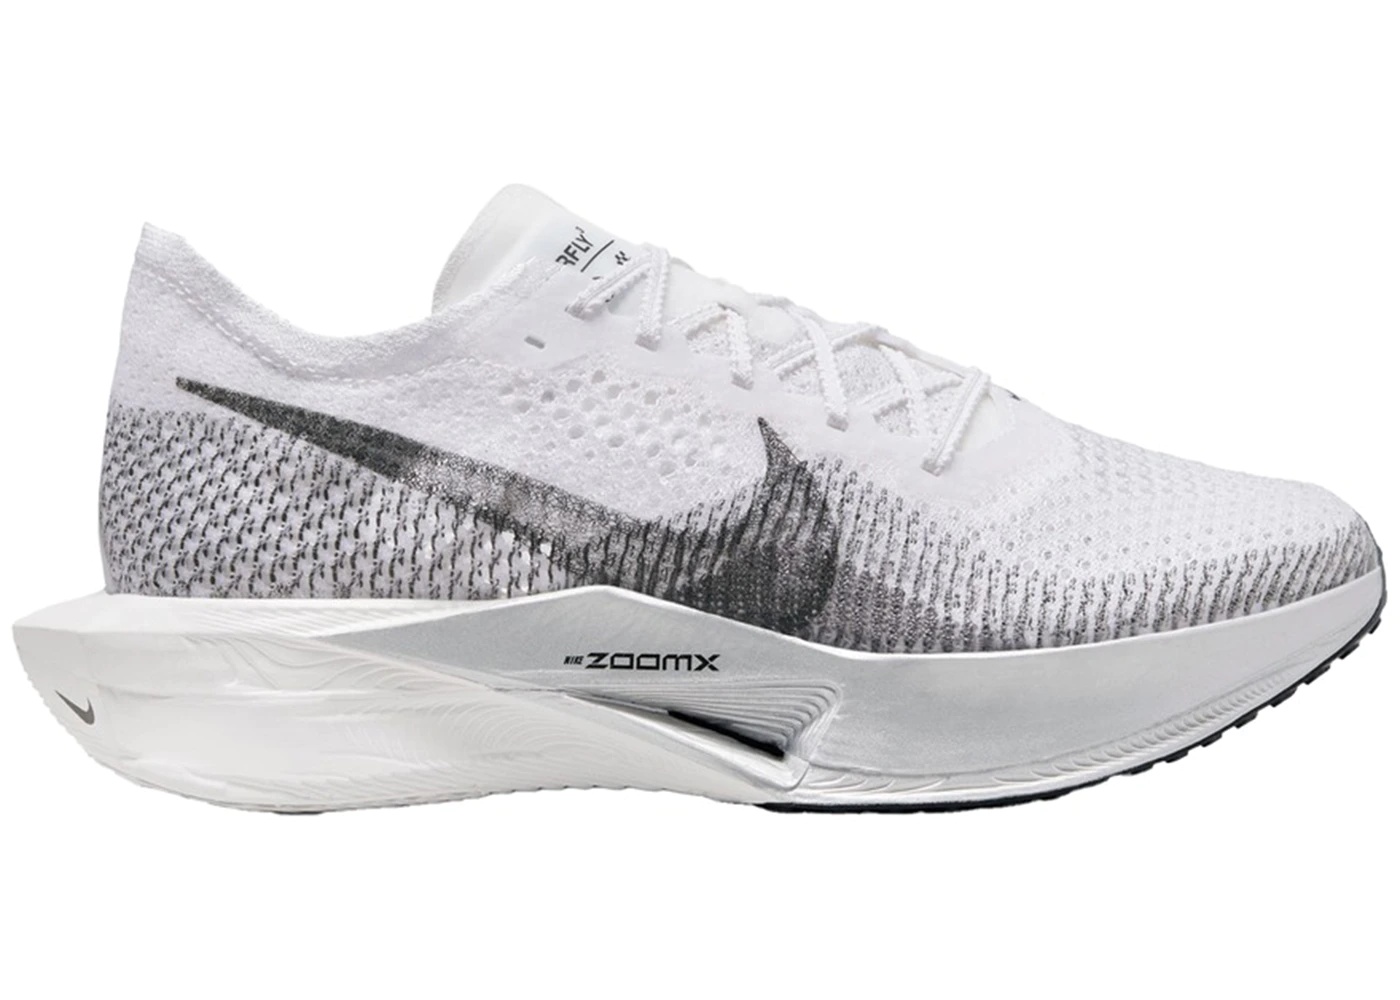 Nike ZoomX Vaporfly 3 White Particle Grey (Women's) - 1